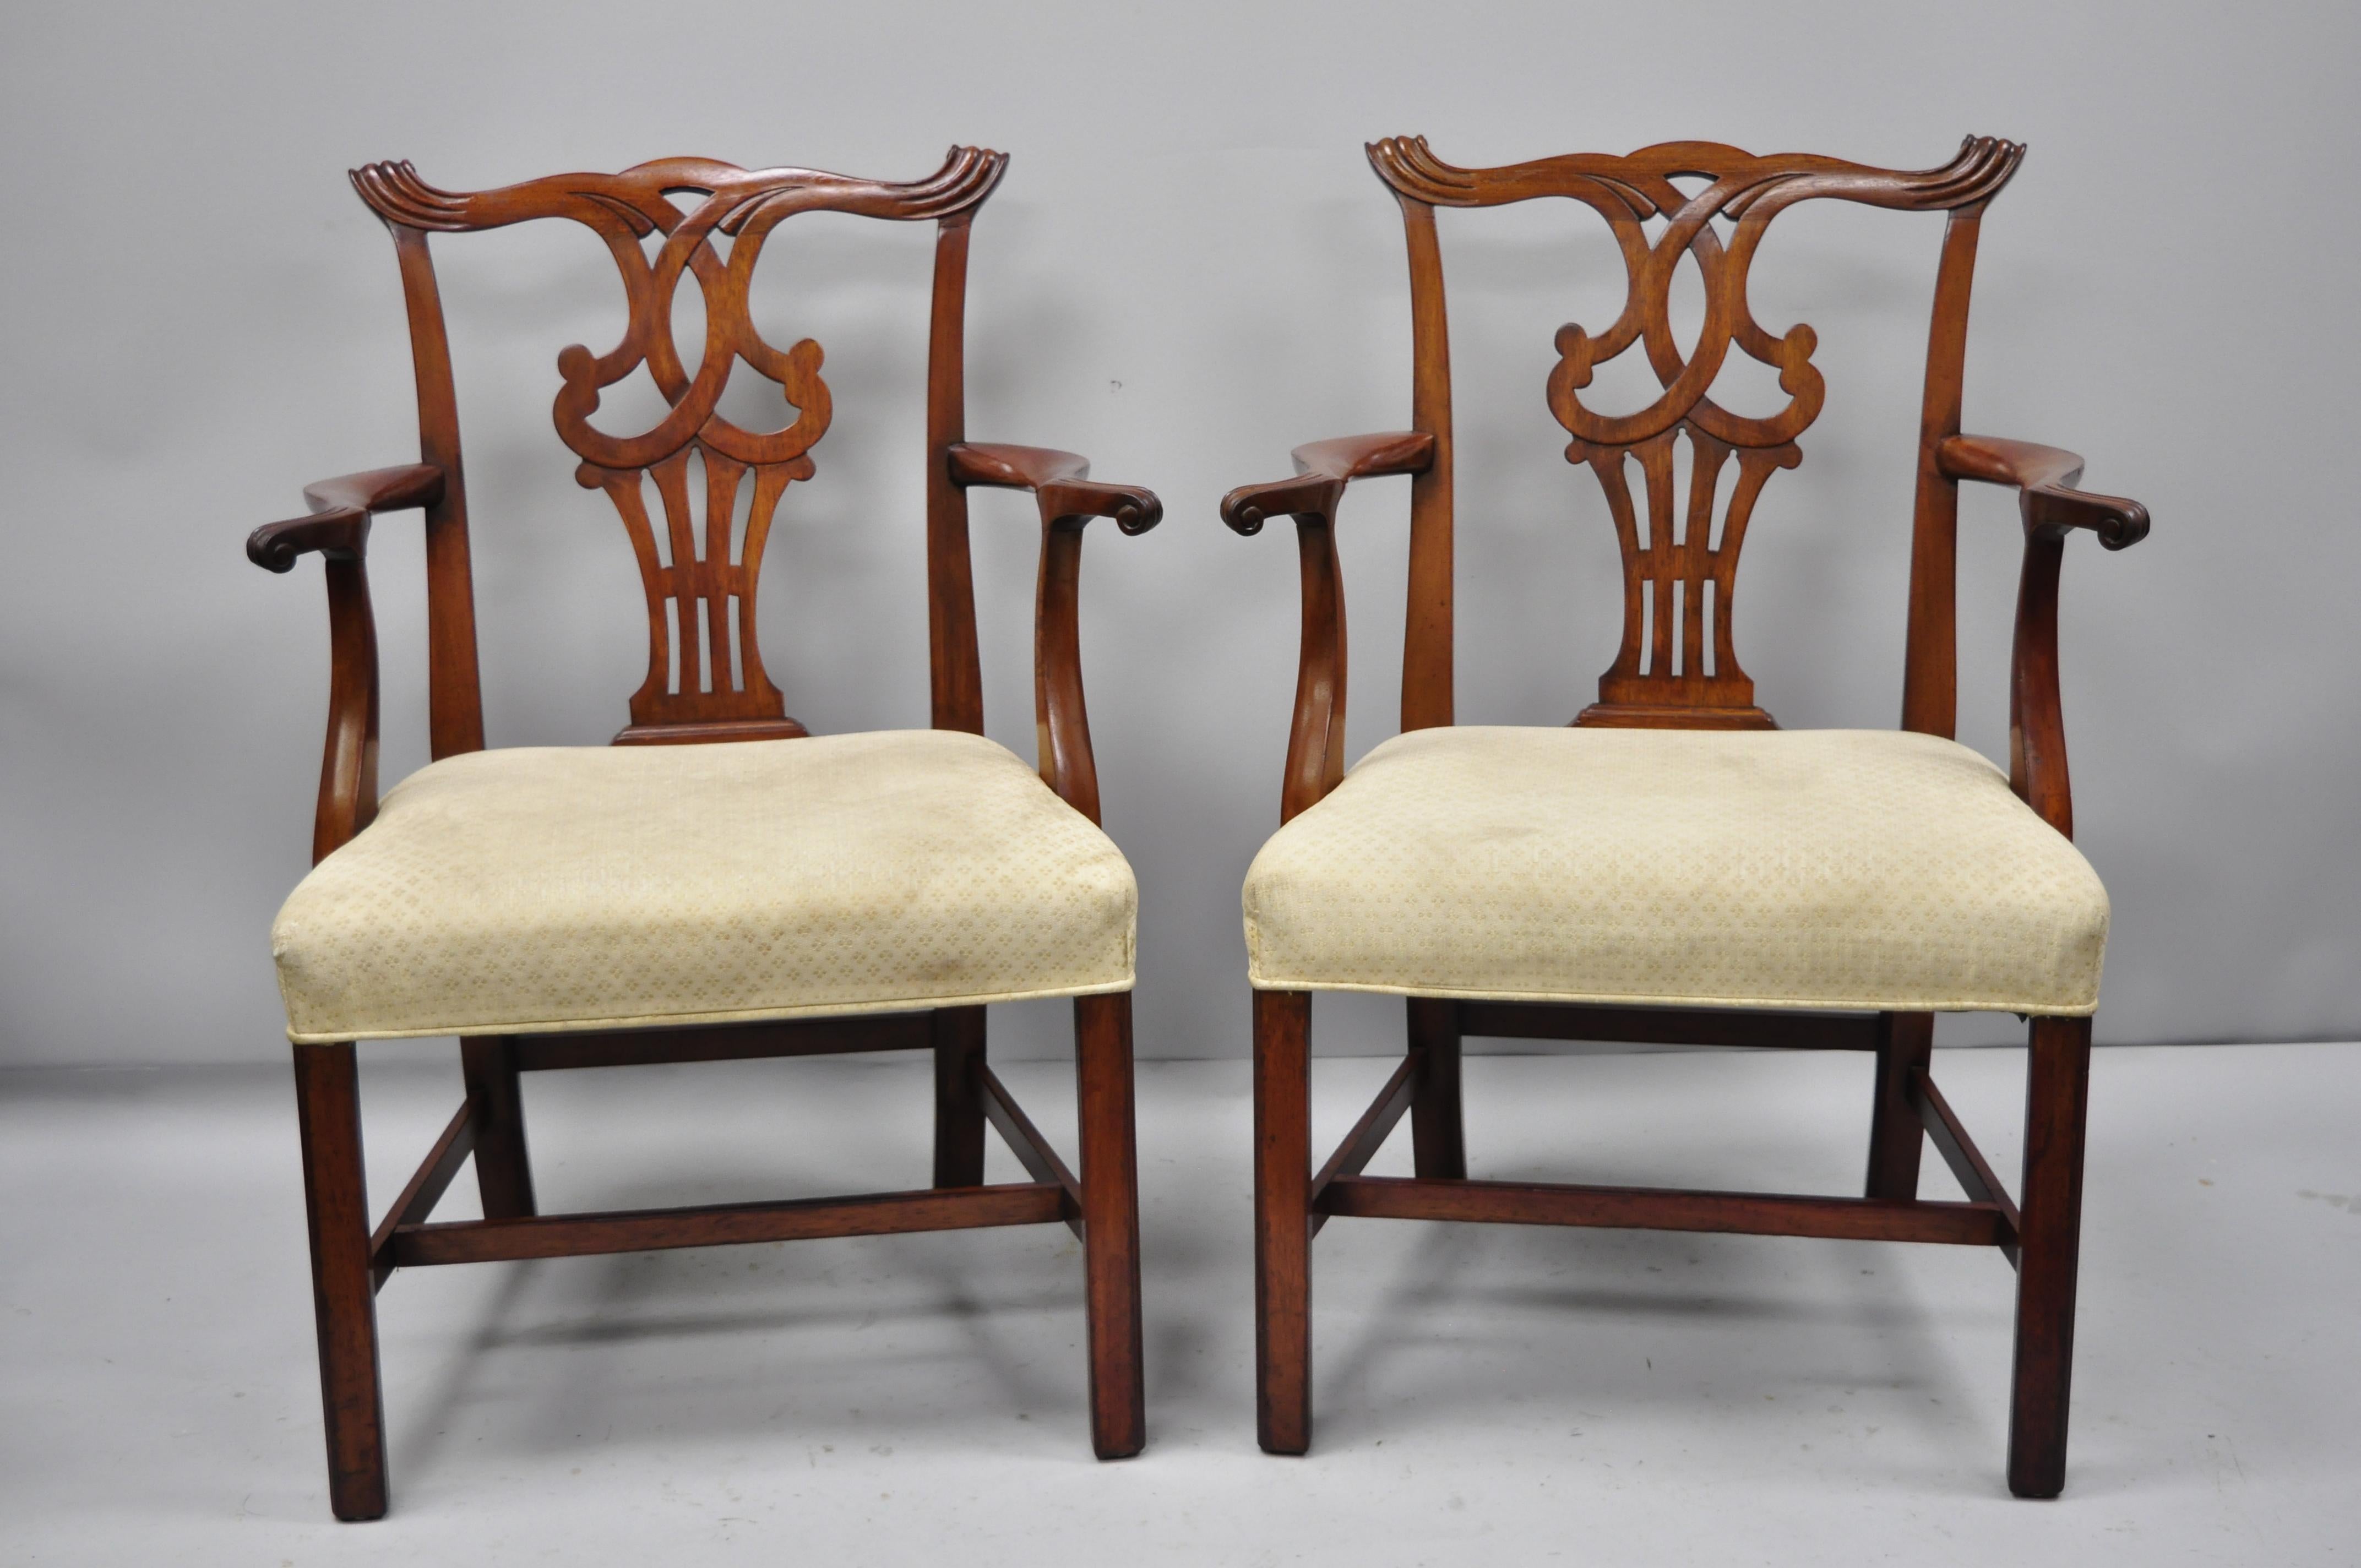 Pair of vintage solid mahogany Chippendale style dining chairs armchairs attributed to baker. Item features solid wood construction, finely carved details, and quality American craftsmanship. Attributed to baker. Early to mid-20th century.